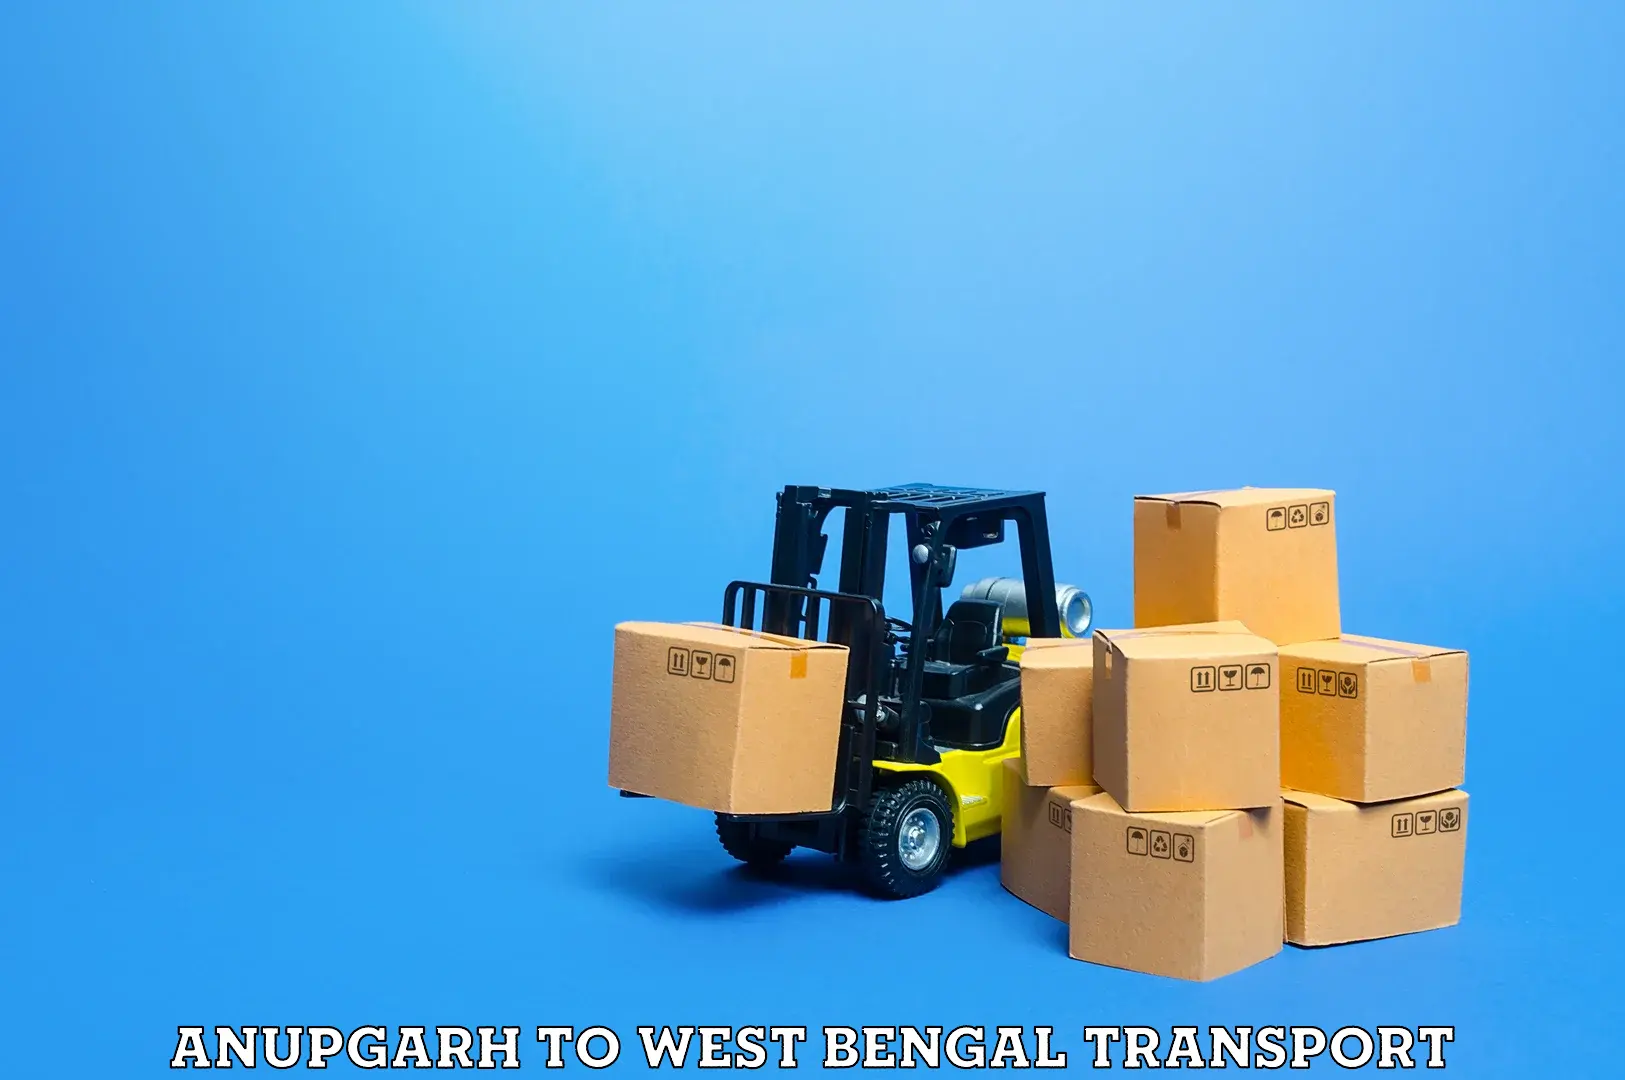 Truck transport companies in India Anupgarh to Asansol